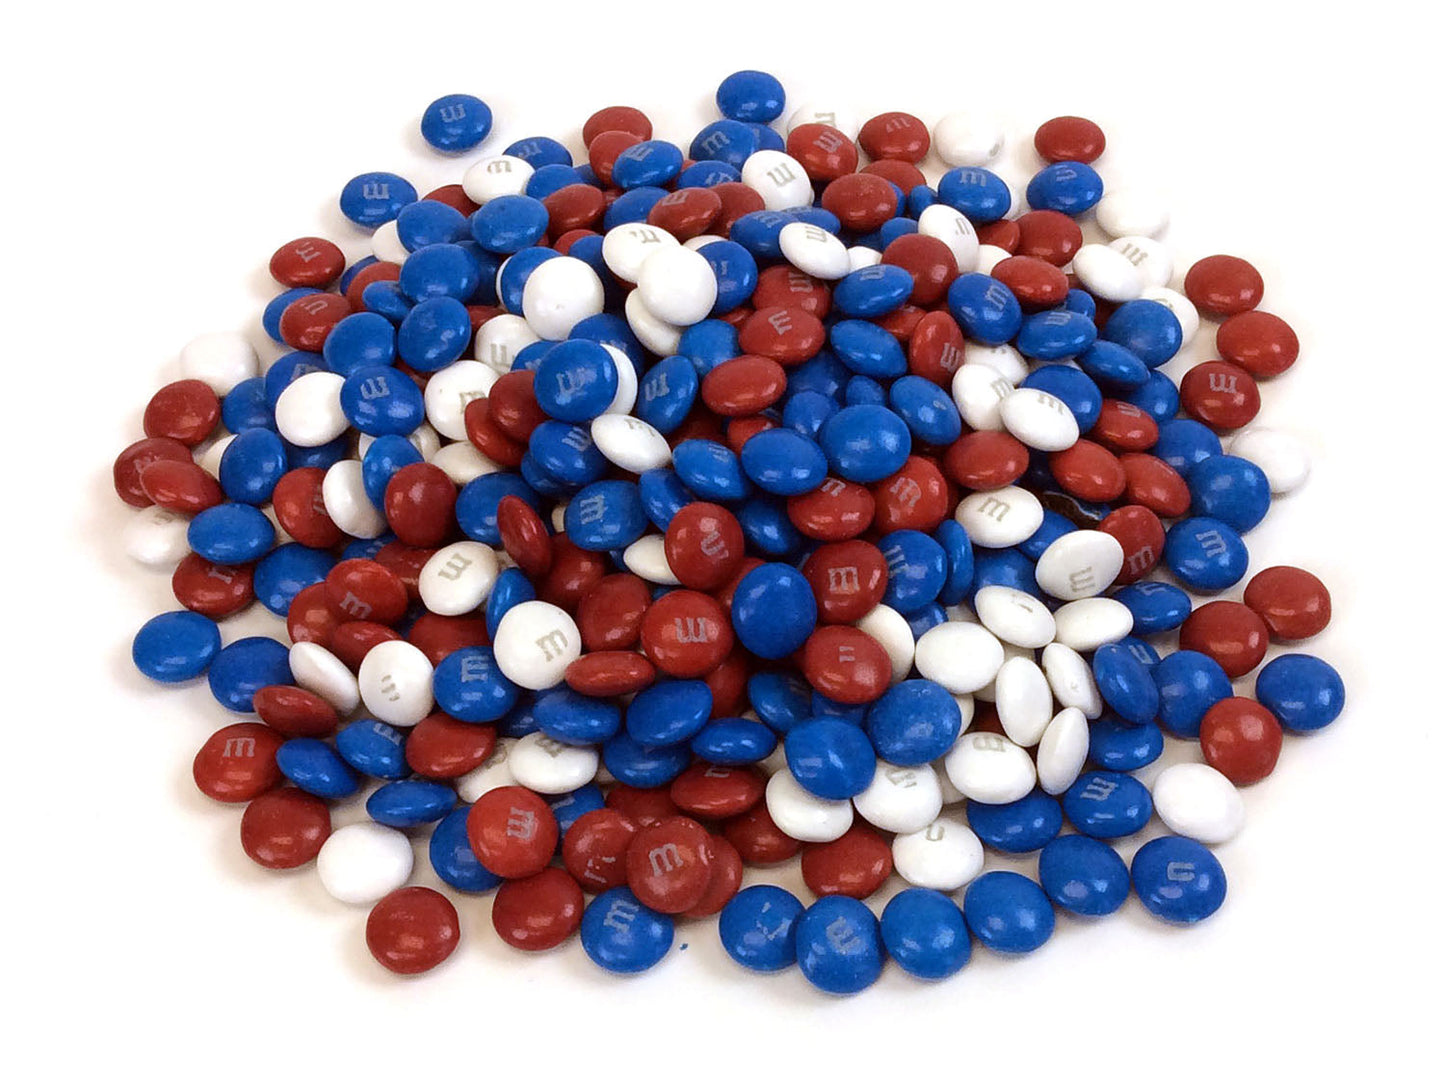 M&M's Peanut Butter Red, White & Blue Patriotic Chocolate Candy